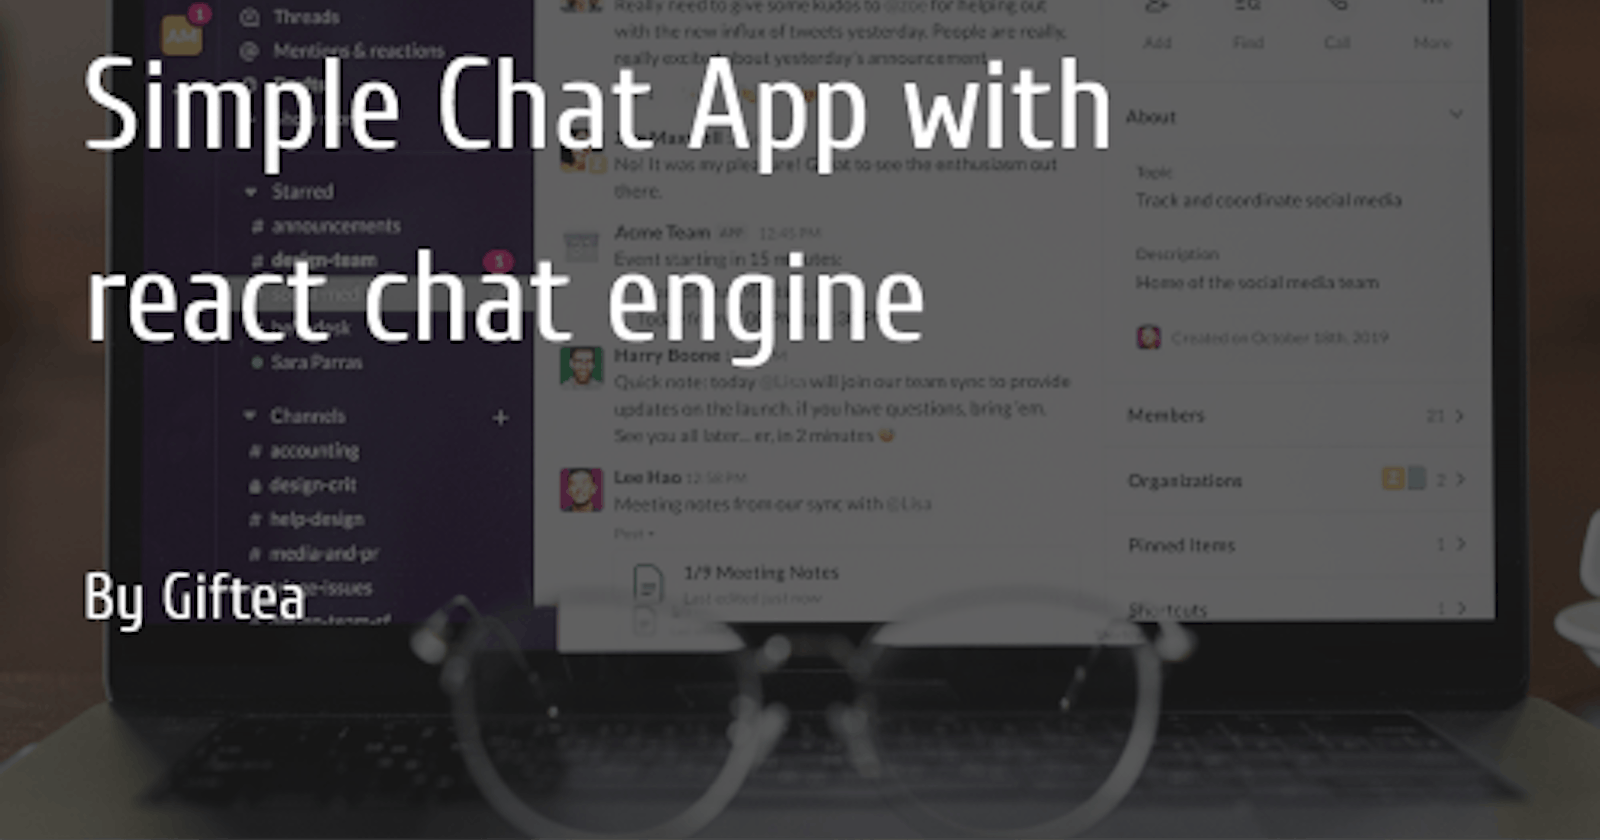 Simple Chat App with react-chat-engine